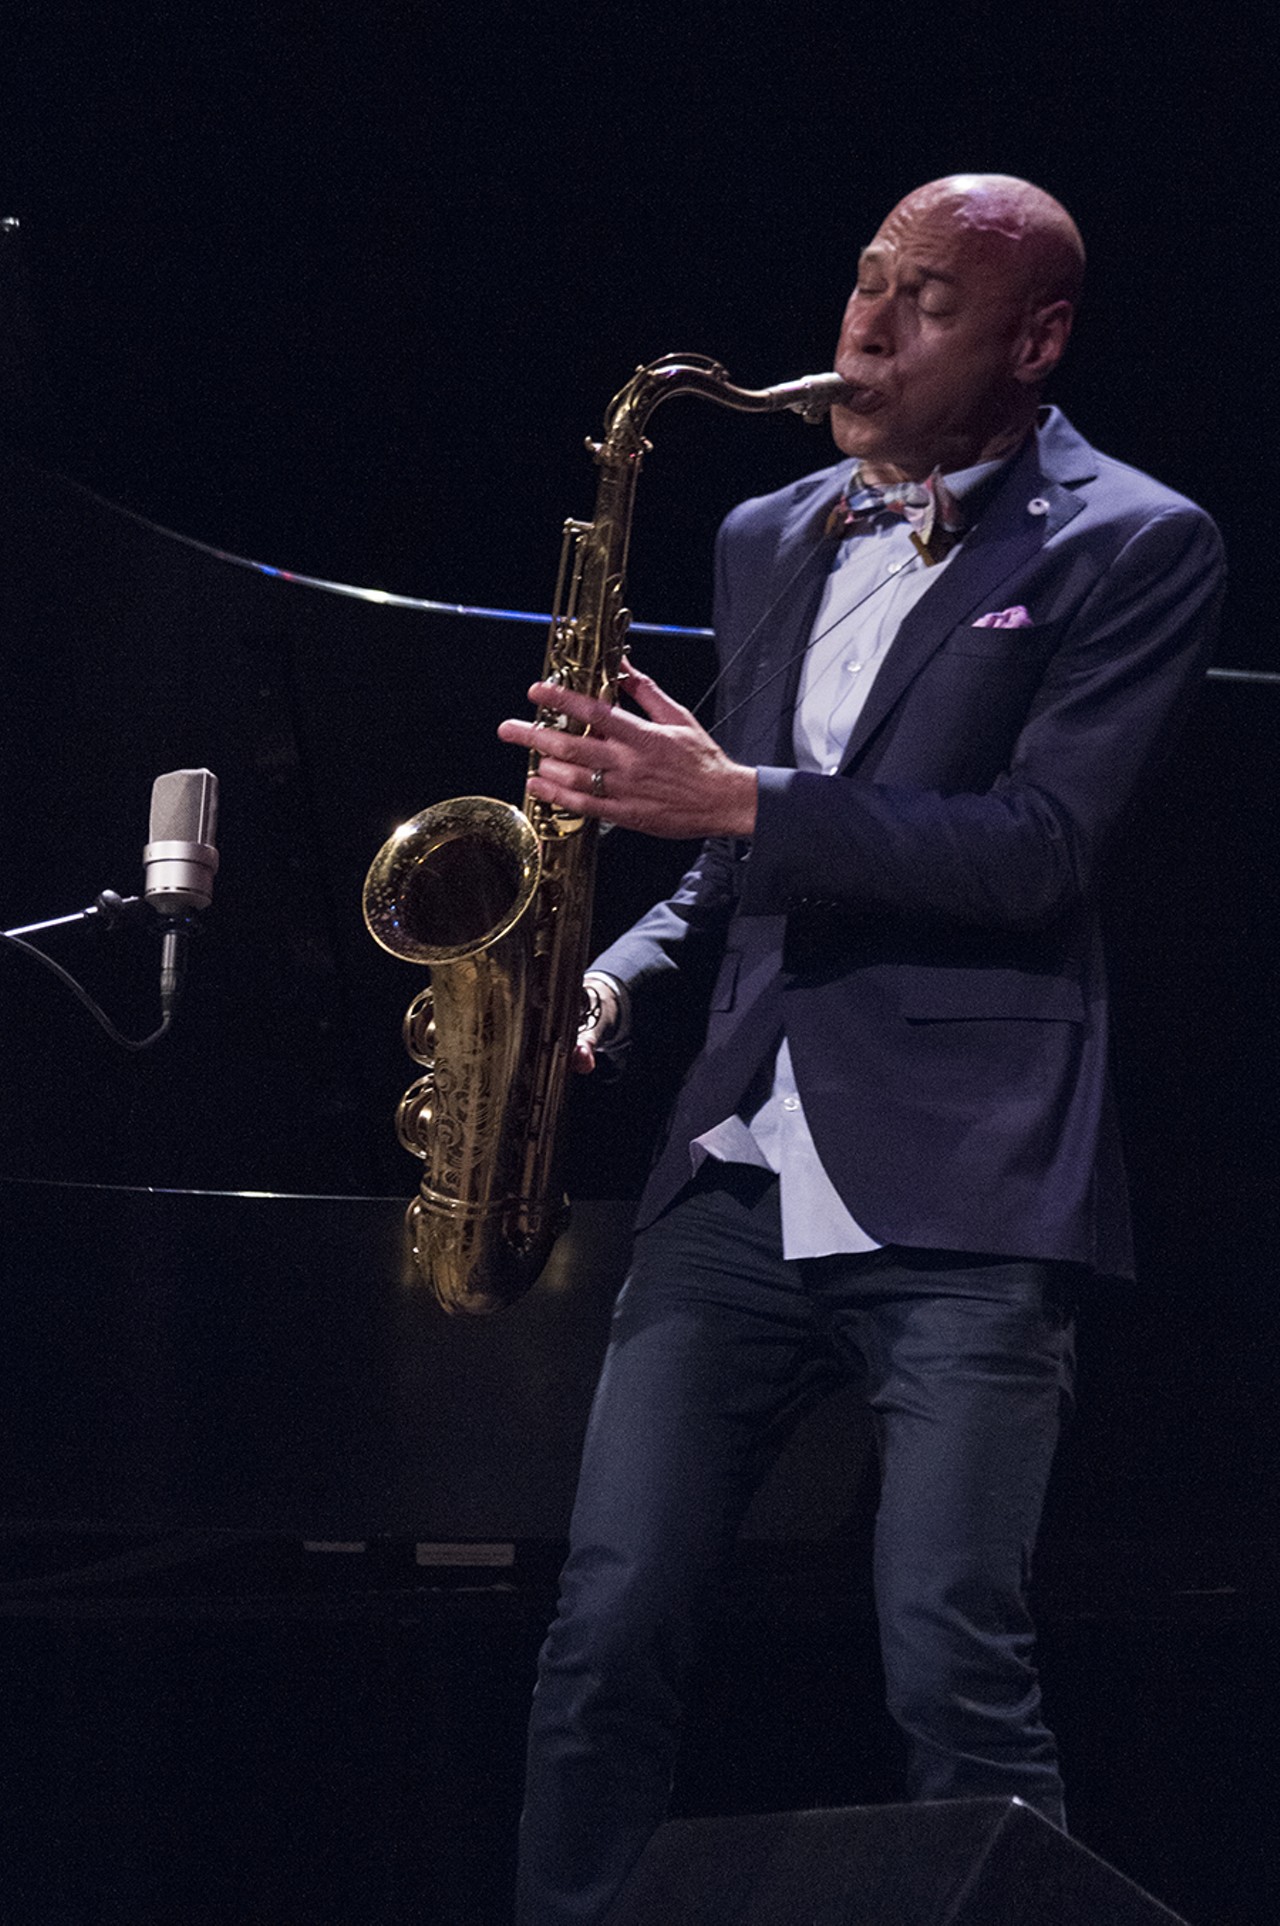 41 photos from The Bad Plus Joshua Redman